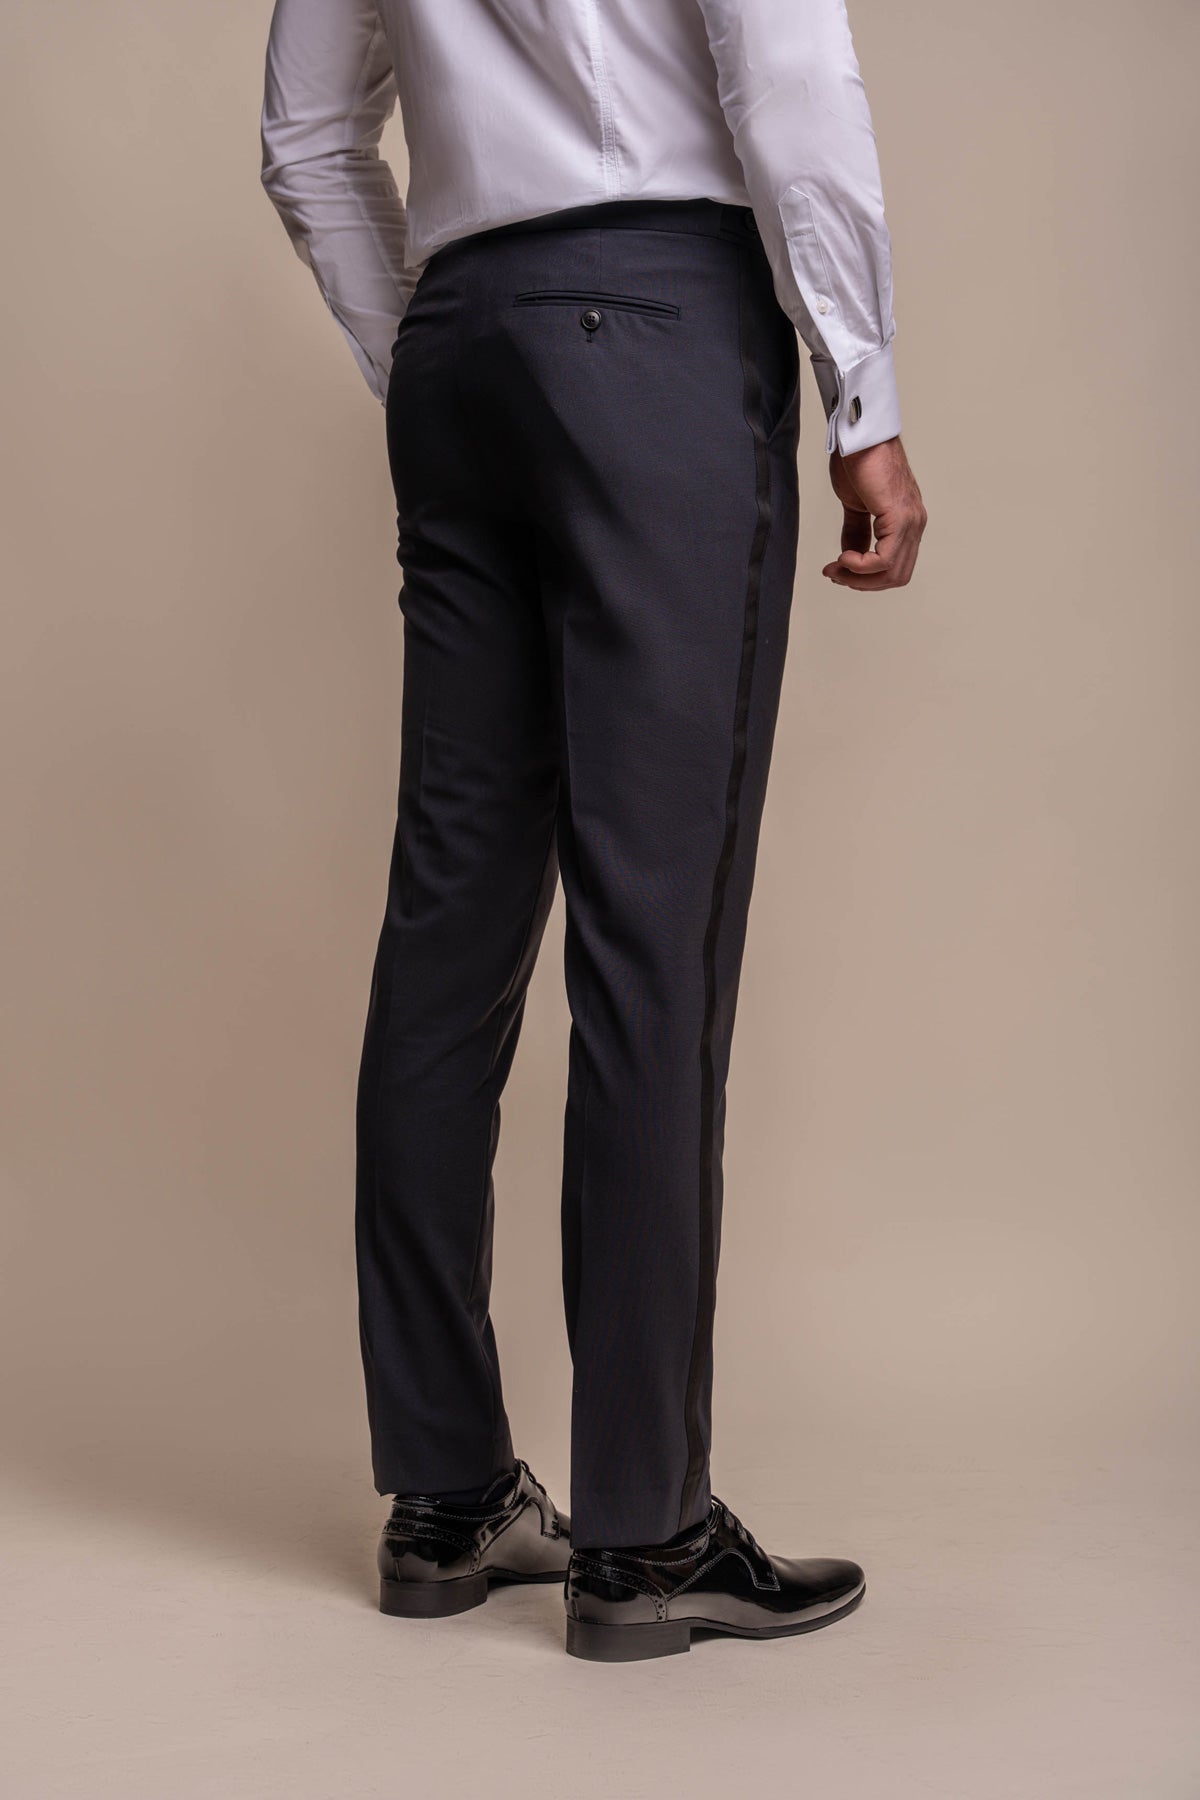 Aspen Midnight Navy Tuxedo Trousers - Trousers - 28R - Swagger & Swoon